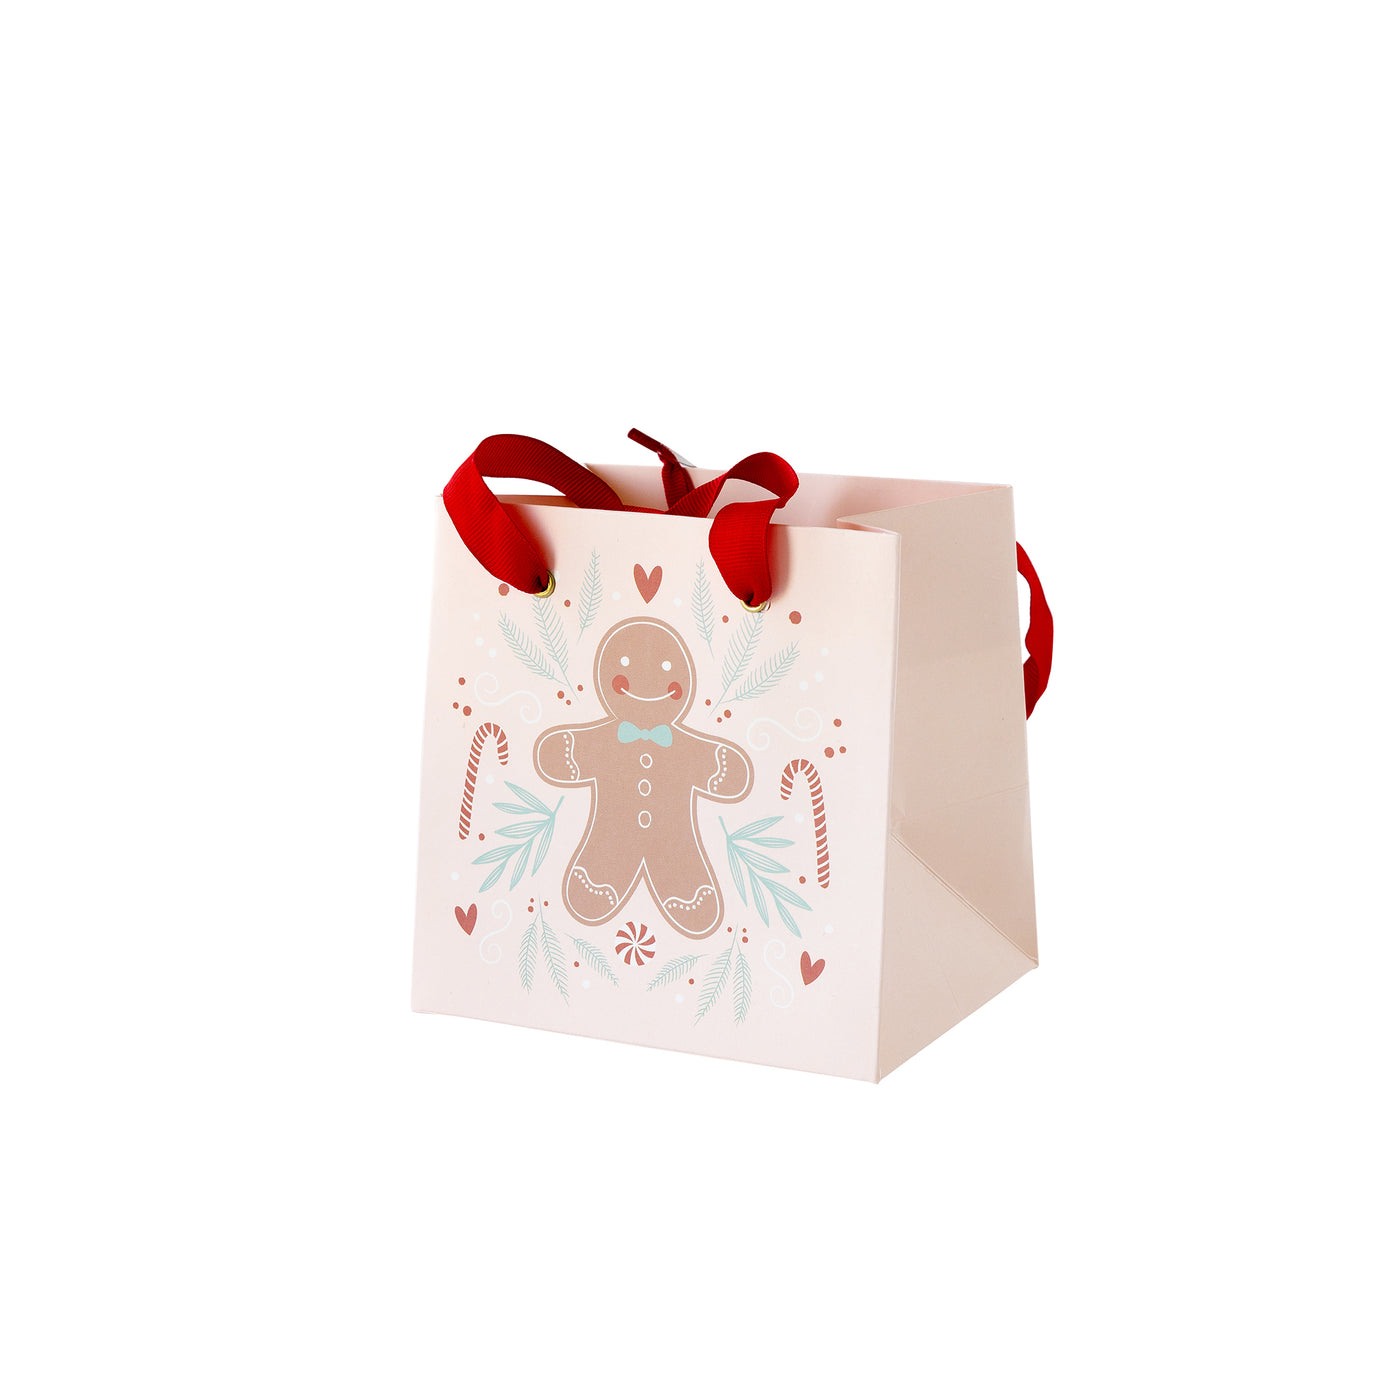 PLGBS62A - Ginger and Cane Mini Gift Bag Set of 6